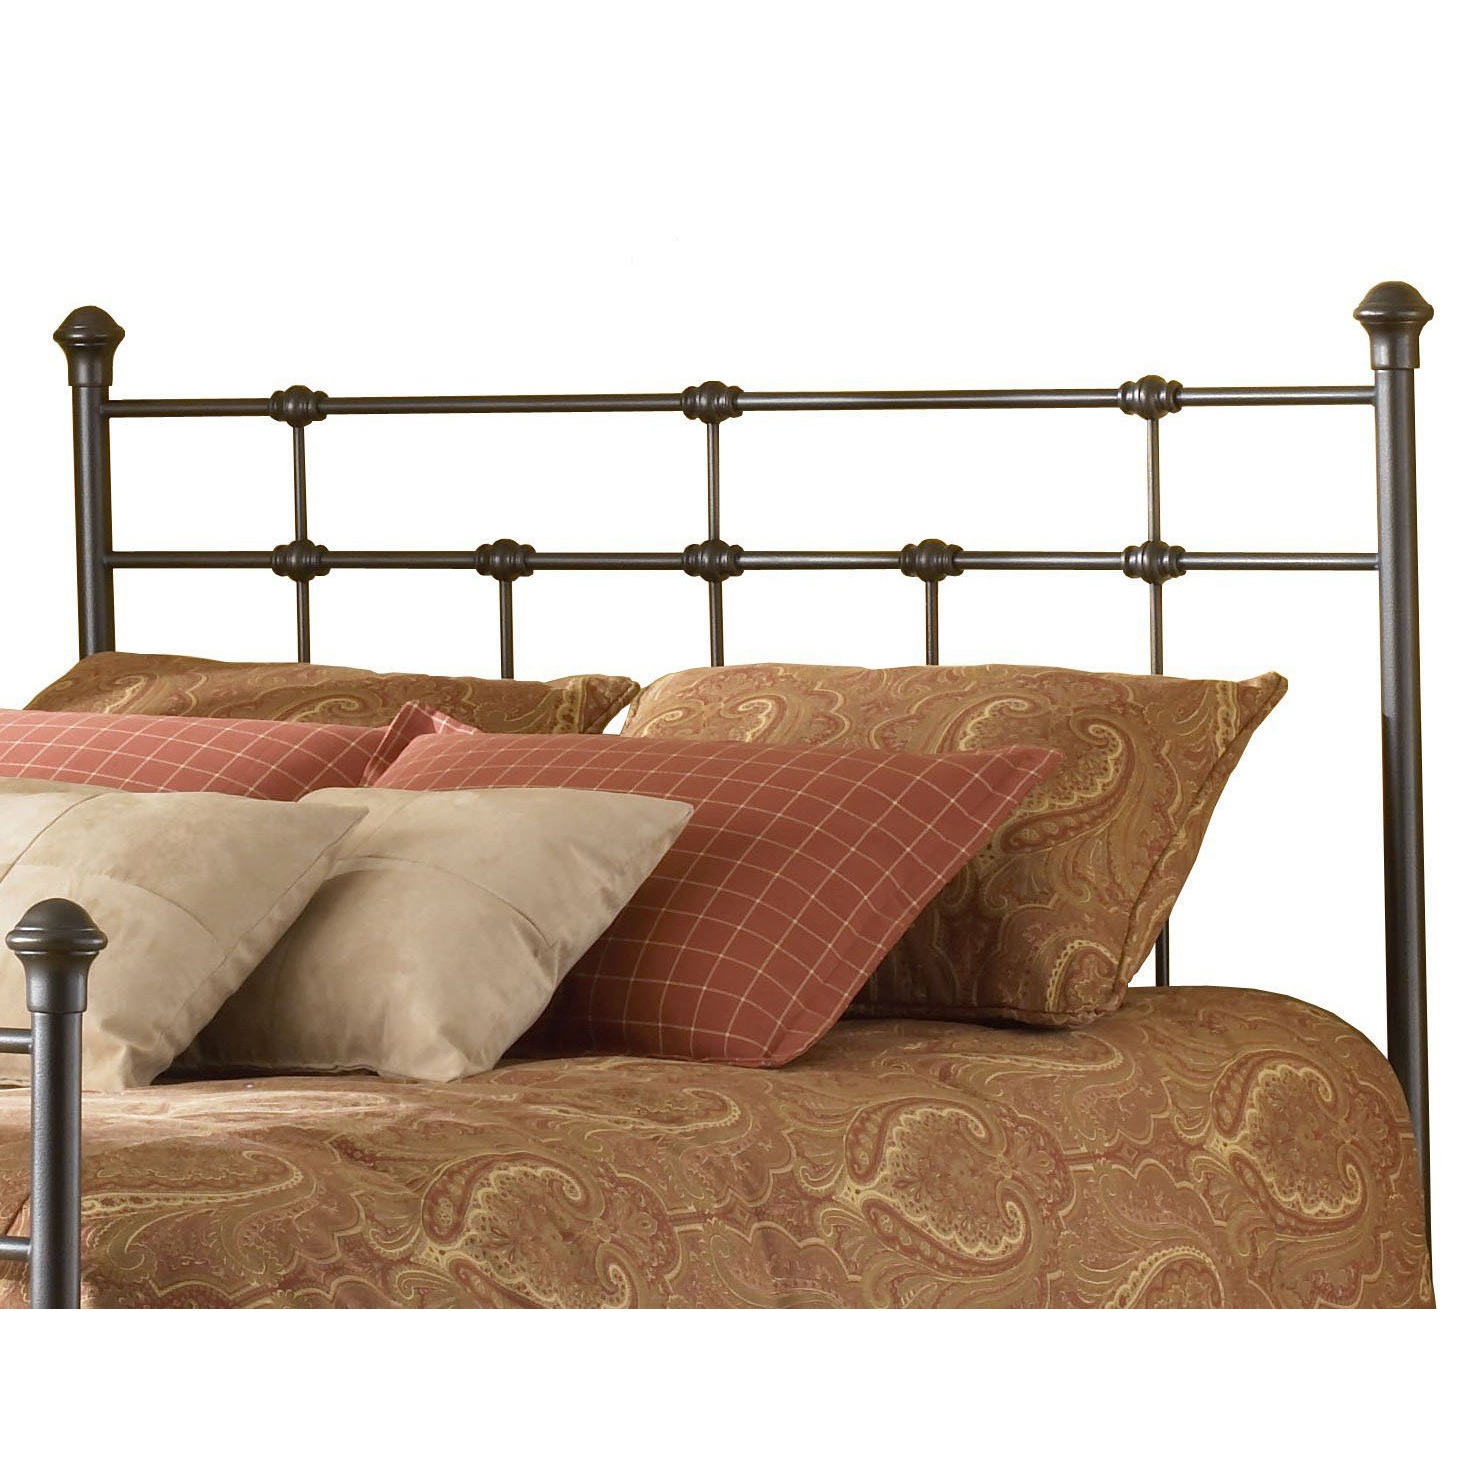 Queen-size Metal Headboard in Hammered Brown Finish